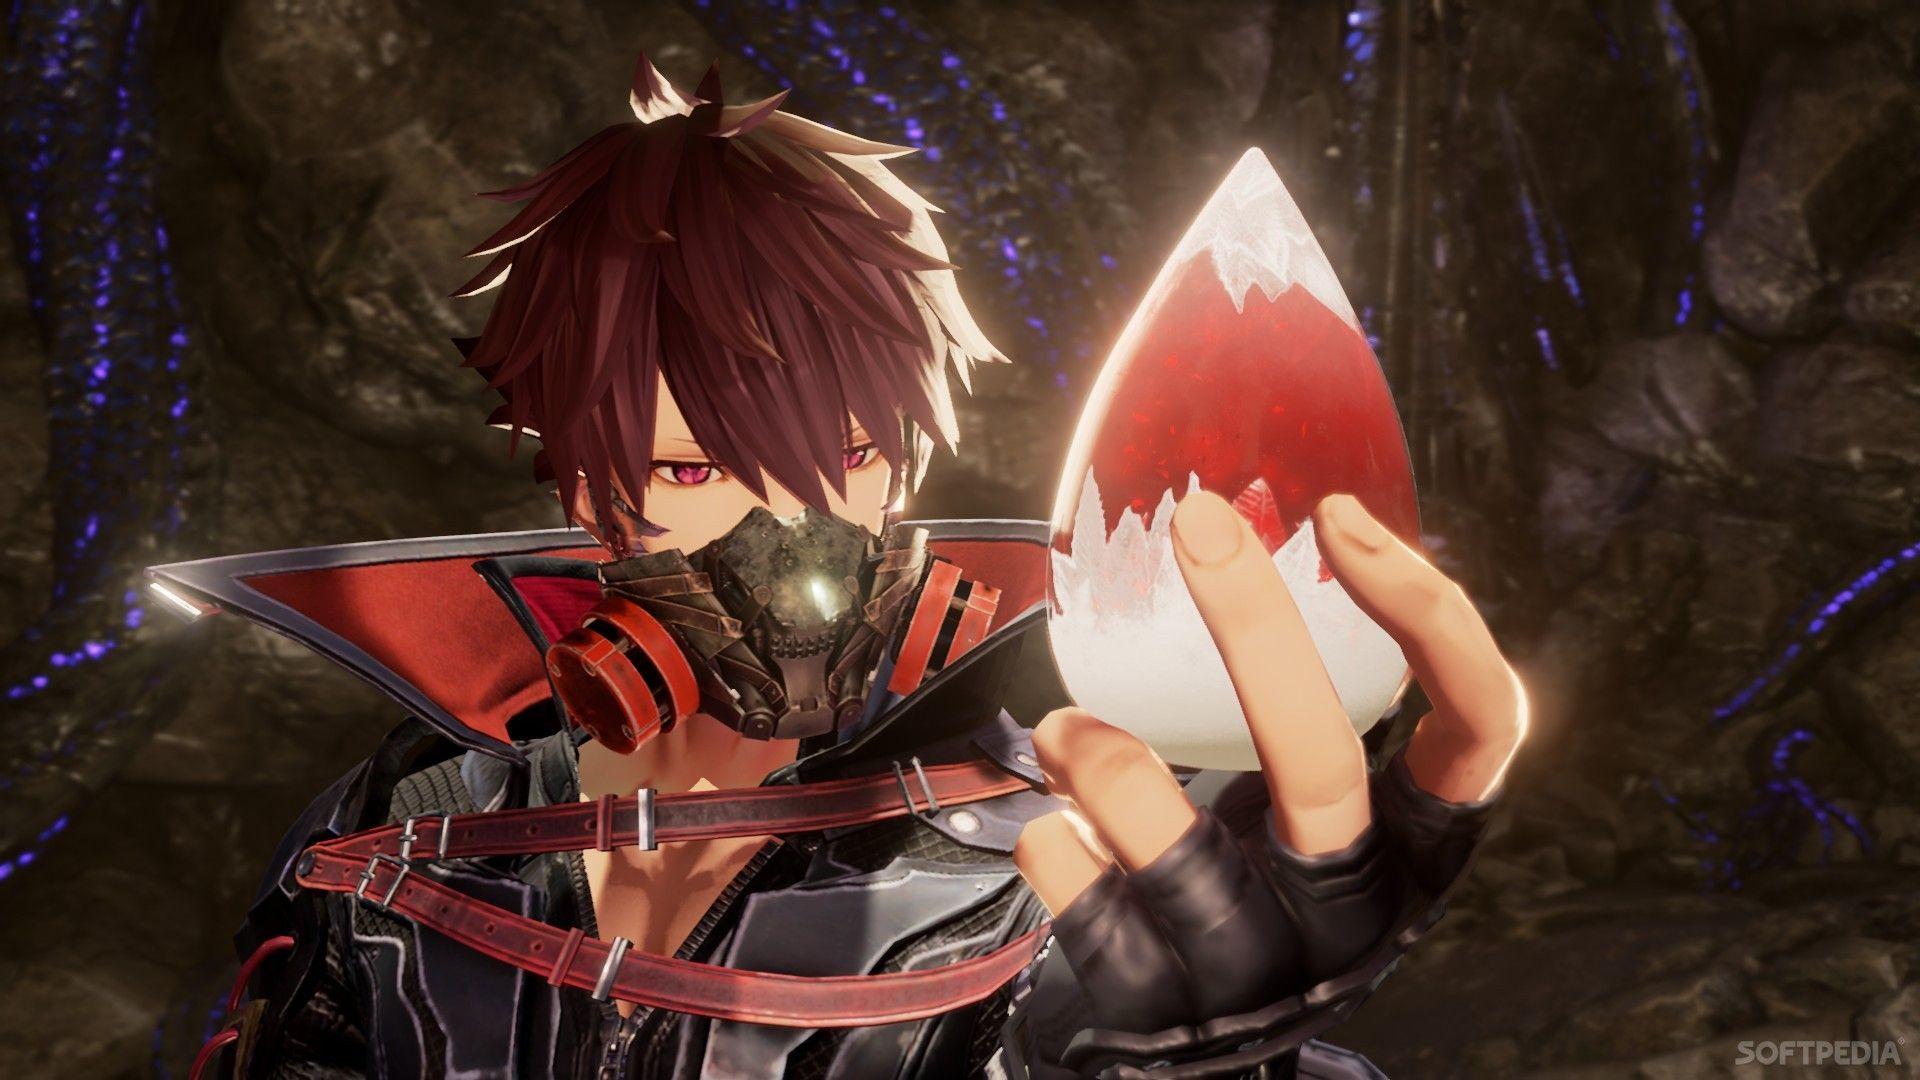 Code Vein Hands On, Gameplay Video And First Impressions